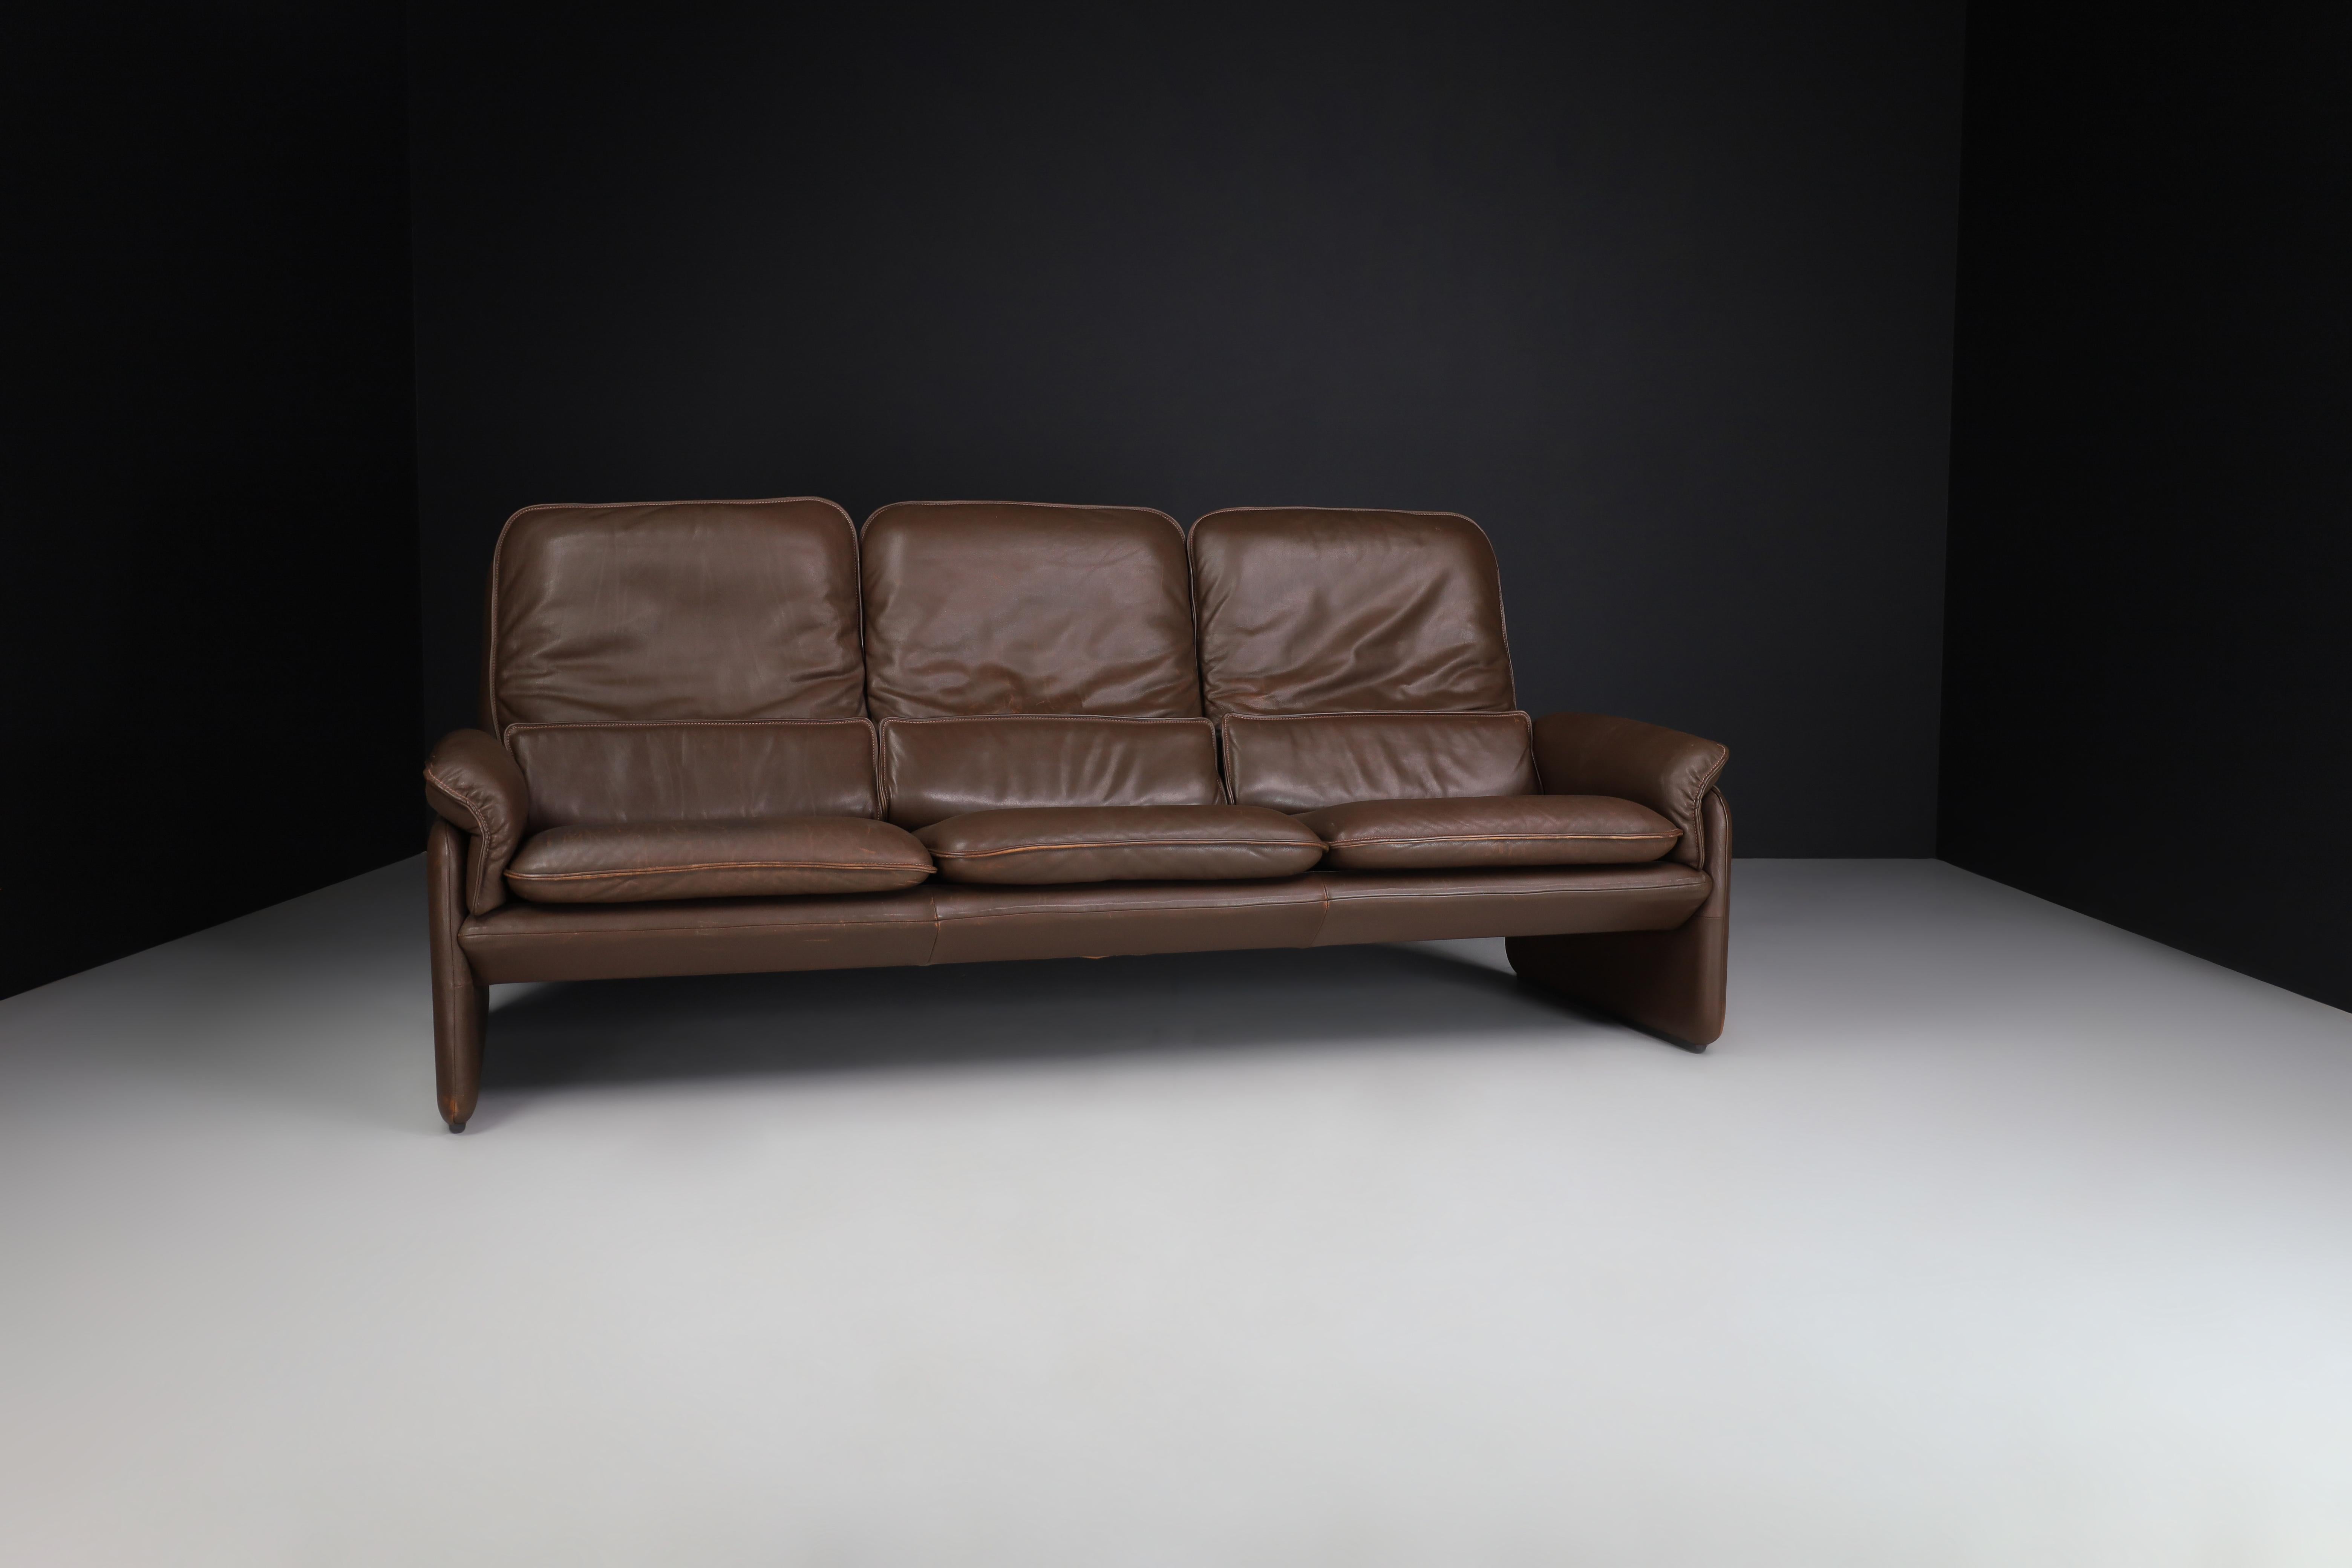 Beautiful DS-61 in coffee brown leather sofa by 'De Sede' Switzerland from the 1970s with a lovely patina in good allover condition. This lounge sofa supports tremendous and is an absolute eye-catcher in your interior. De Sede started as a family